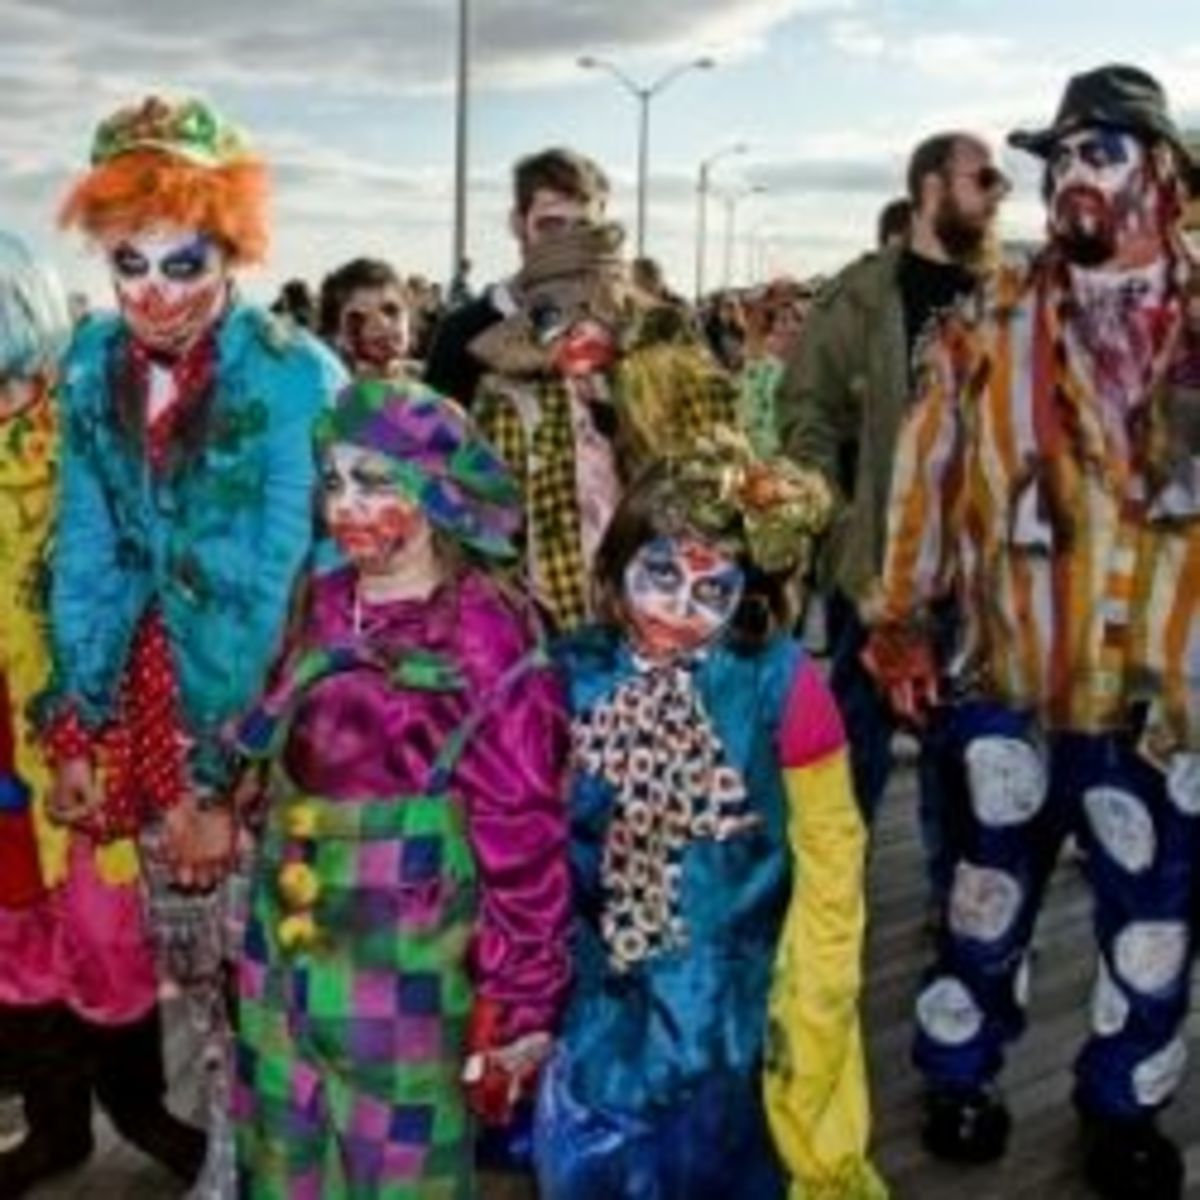 Zombie Walk - Clown Family by Bob Jagendorf [CC BY-SA 2.0] on Flickr